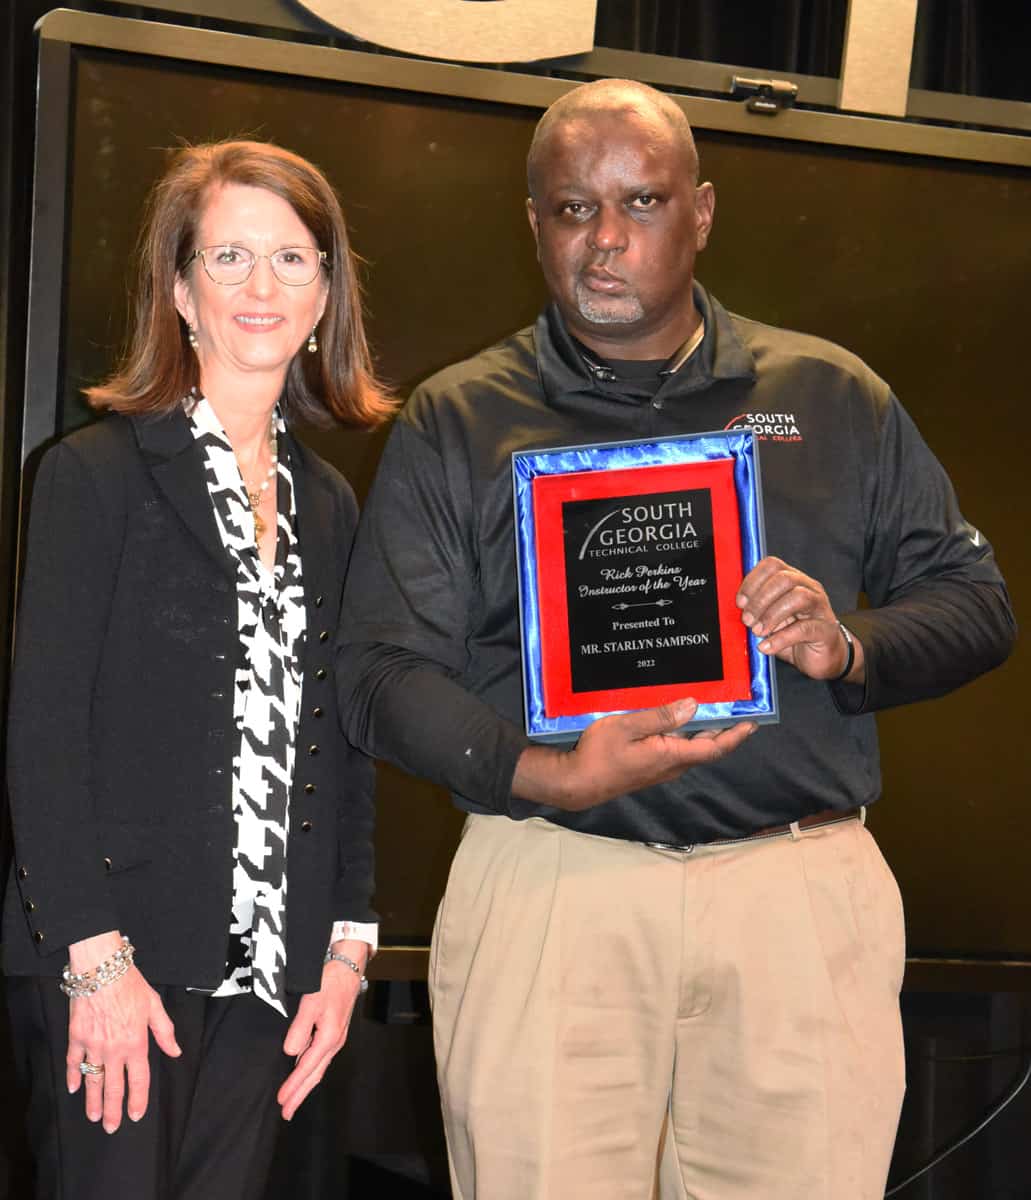 Synovus’ Tami Duke is shown above (l to r) presenting Starlyn Sampson with a donation from Synovus for being selected as the South Georgia Technical College 2022 Rick Perkins Instructor of the Year.